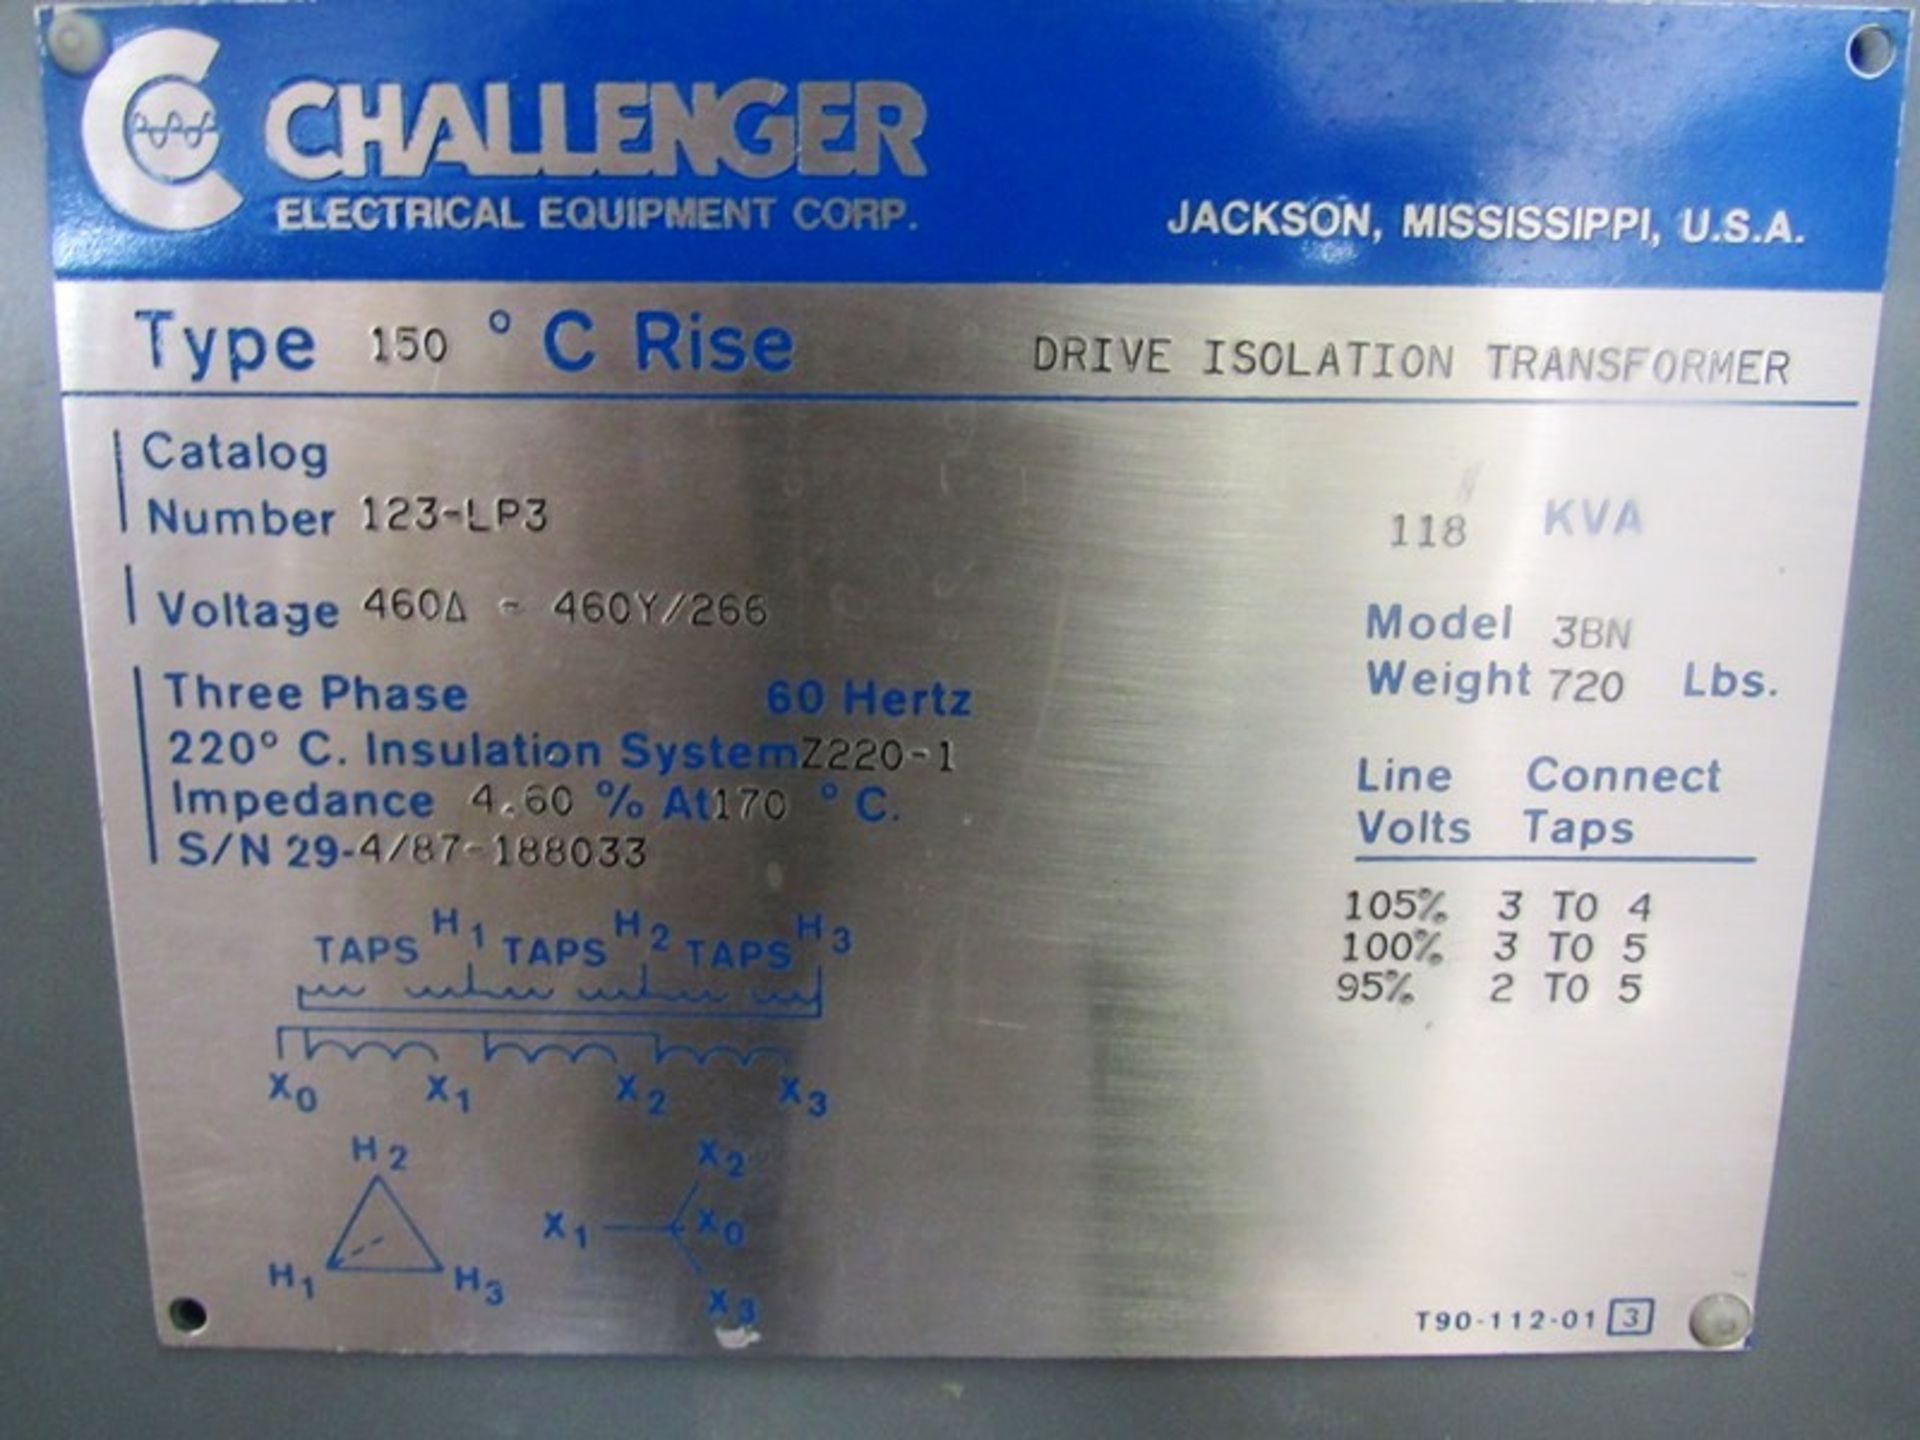 Challenger Mdl. 3BN Drive Isolation Transformer C-Rise Type 150º, KVA 118, Cat. #123LP3, voltage - Image 3 of 3